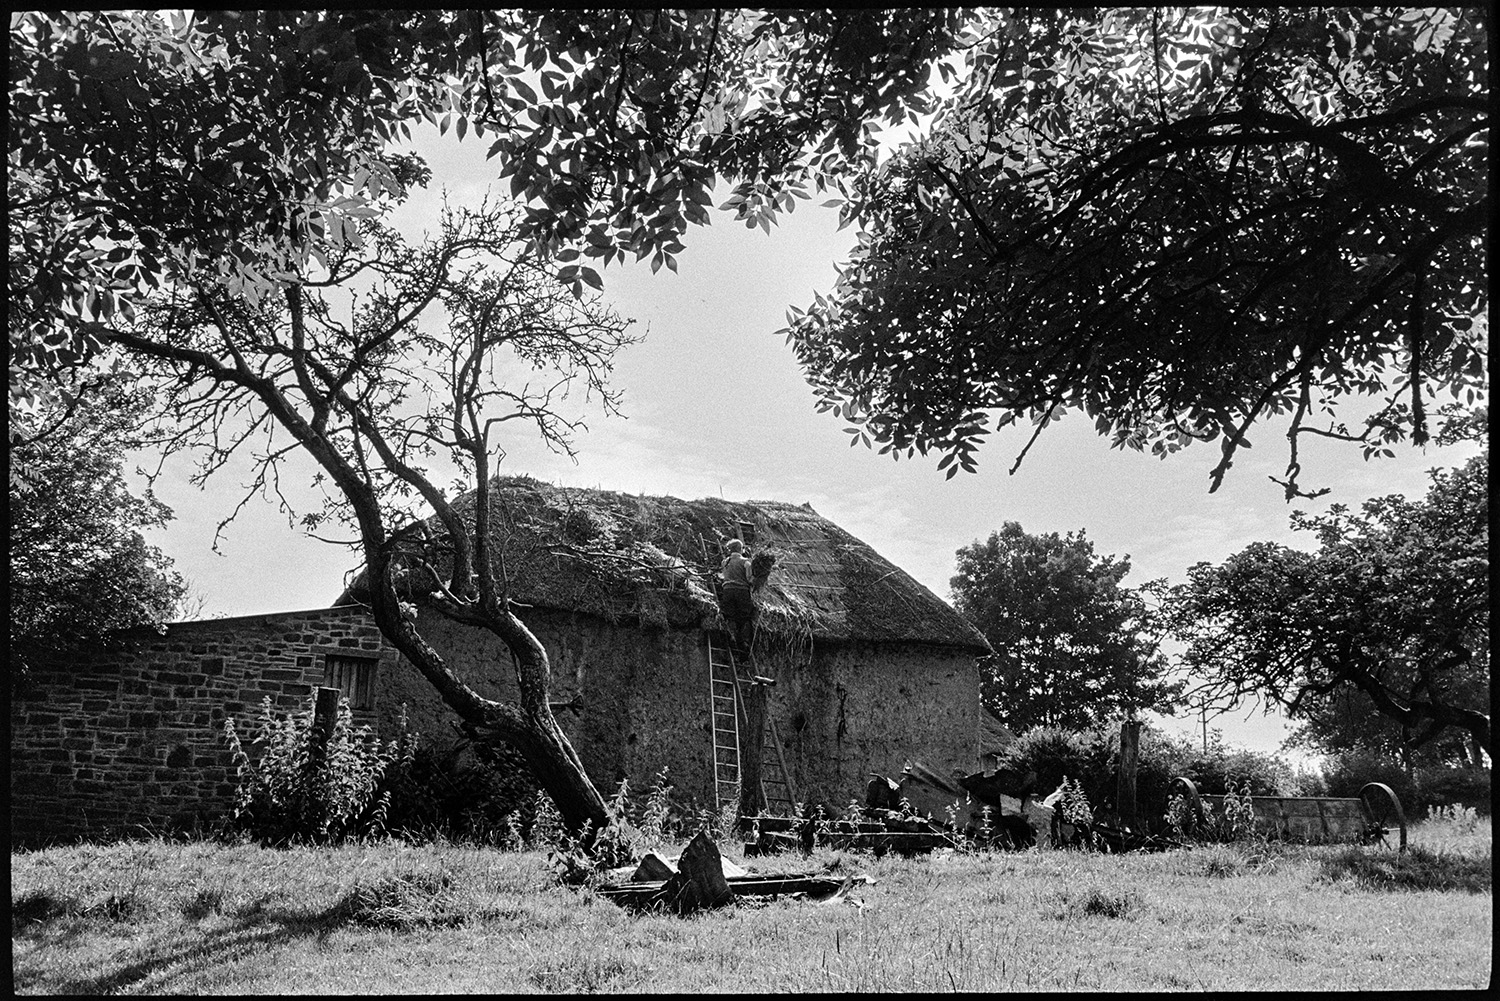 Cob barn being thatched, seed drill in foreground. 
[Bill Hammond re-thatching a cob barn at Newhouse, Ashreigney. The barn is surrounded by trees and a wooden seed drill is visible to the right of the barn.]